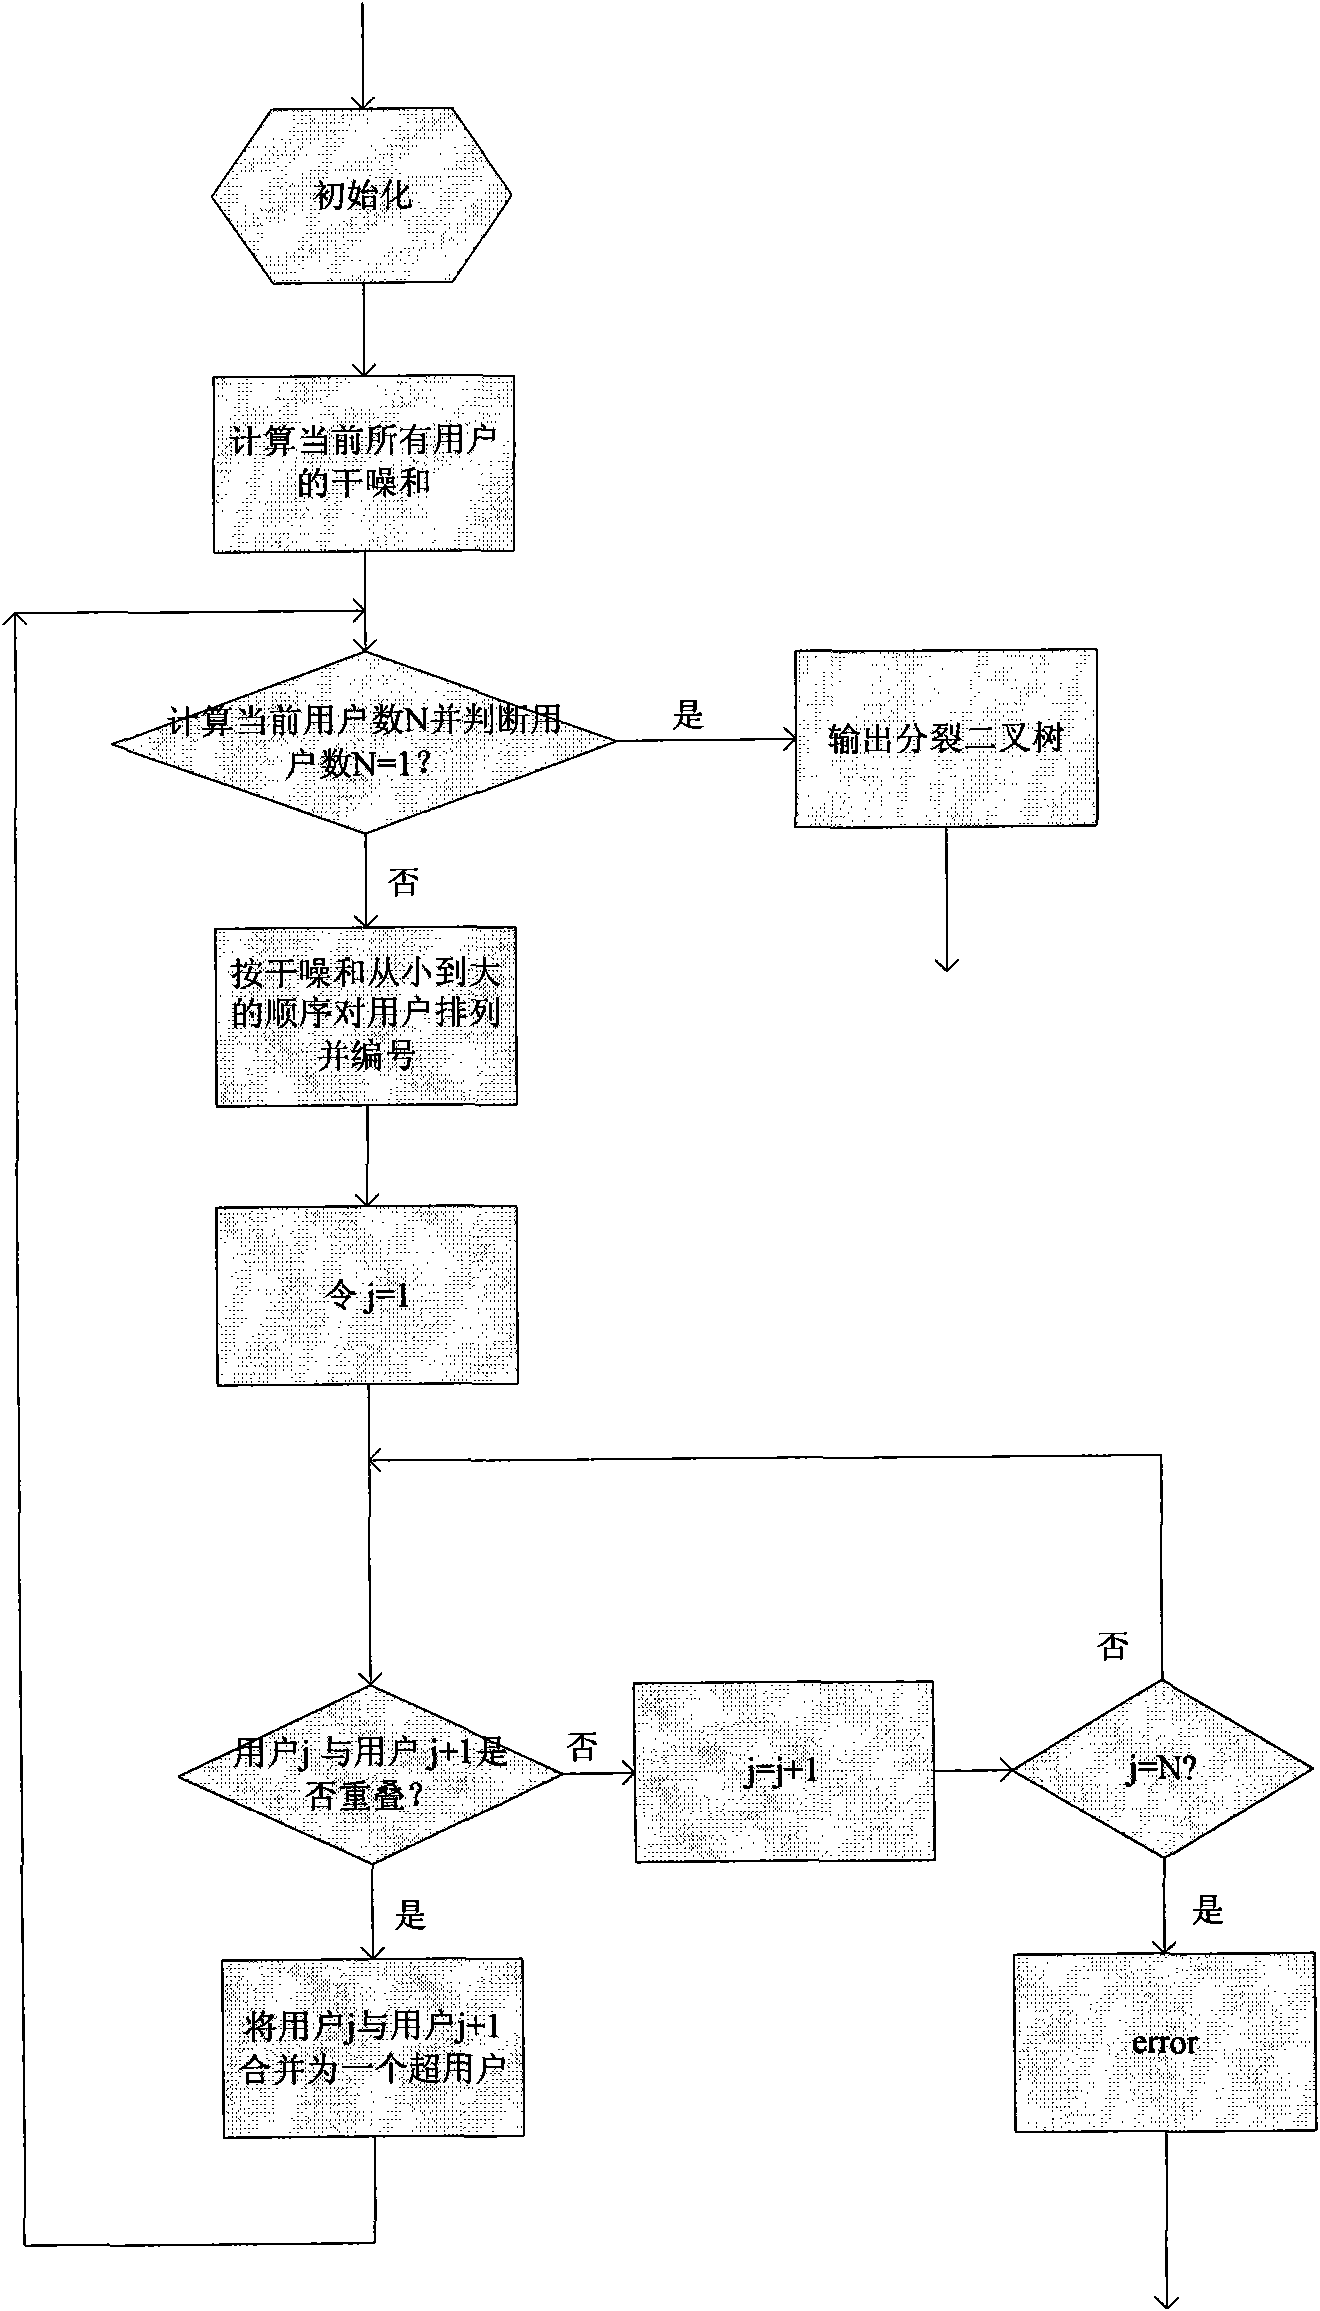 Rate splitting based method for allocating user rates in wireless multiple access channels